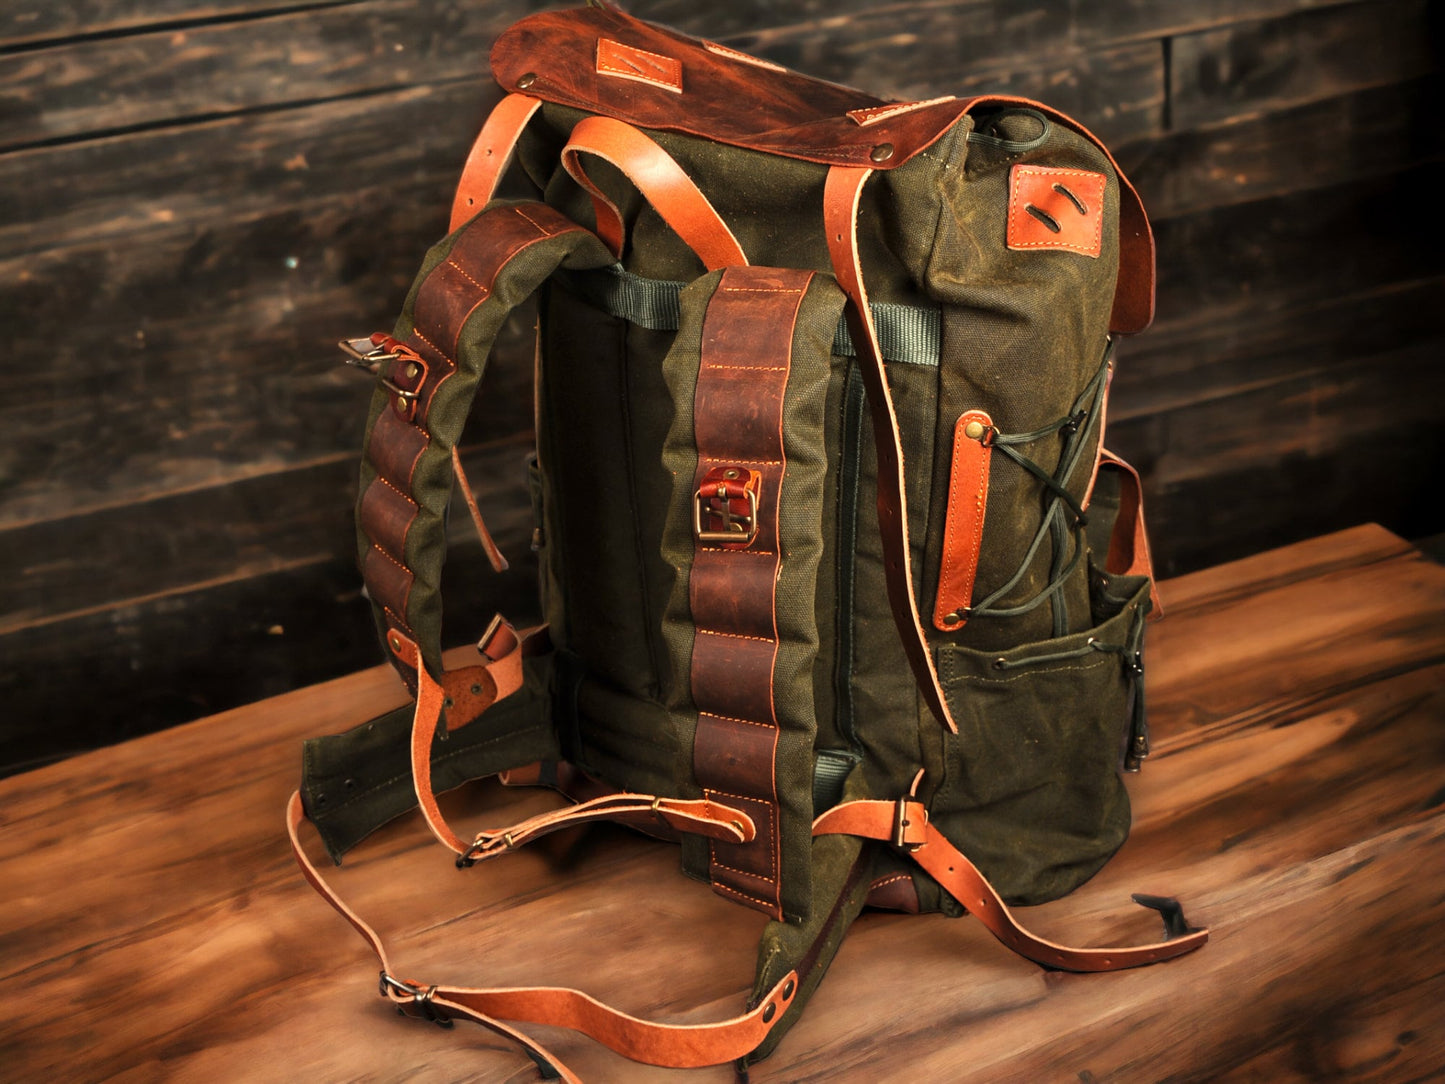 Limited Camping Backpack | 30L to 80L Options | Green-Brown-Black Colors | Leather and Canvas Backpack for Camping Bushcraft Hiking Travel  99percenthandmade   